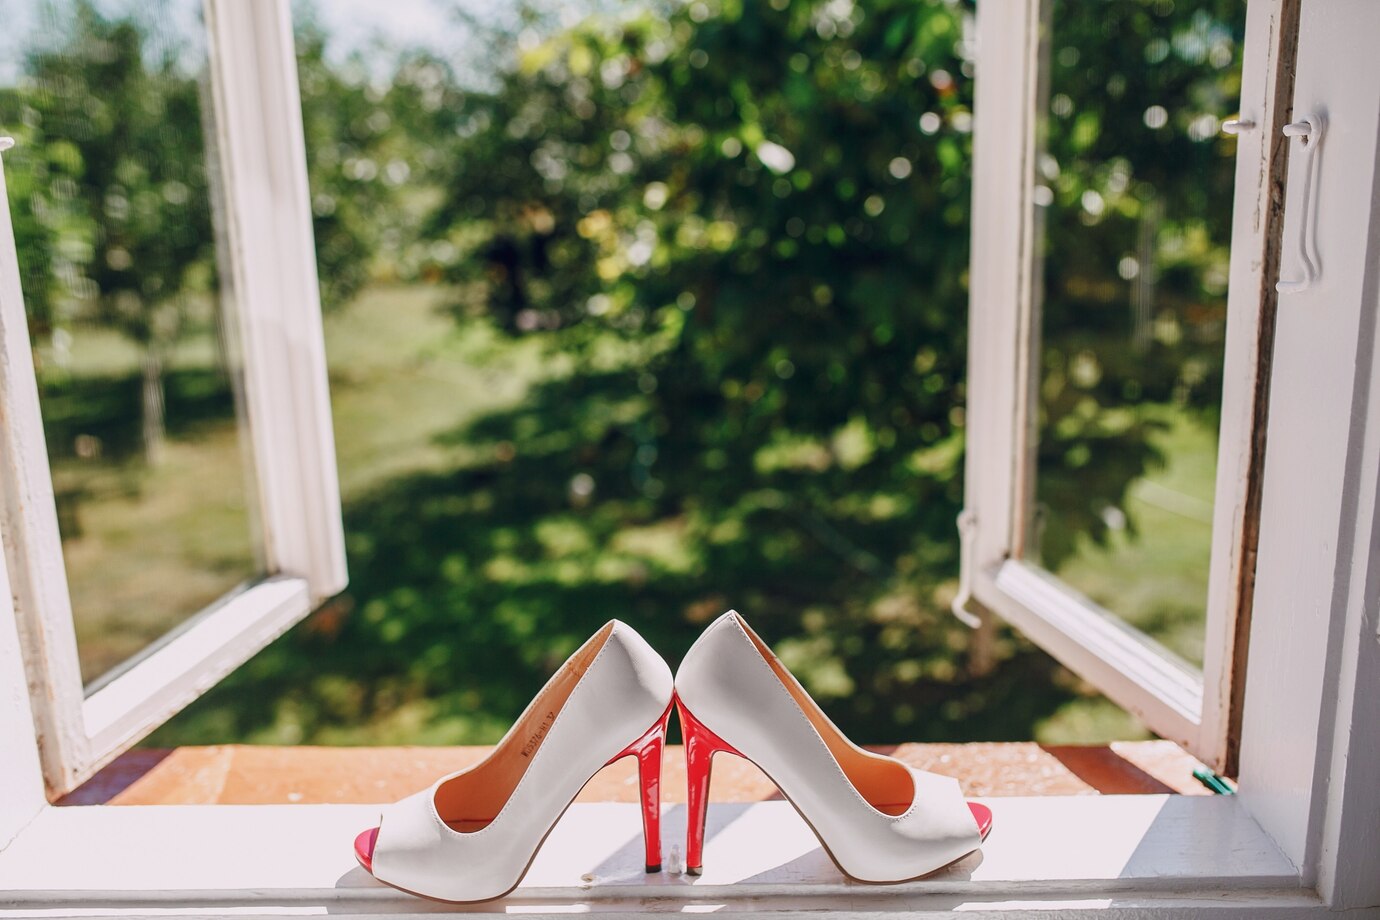 Shoes by the window